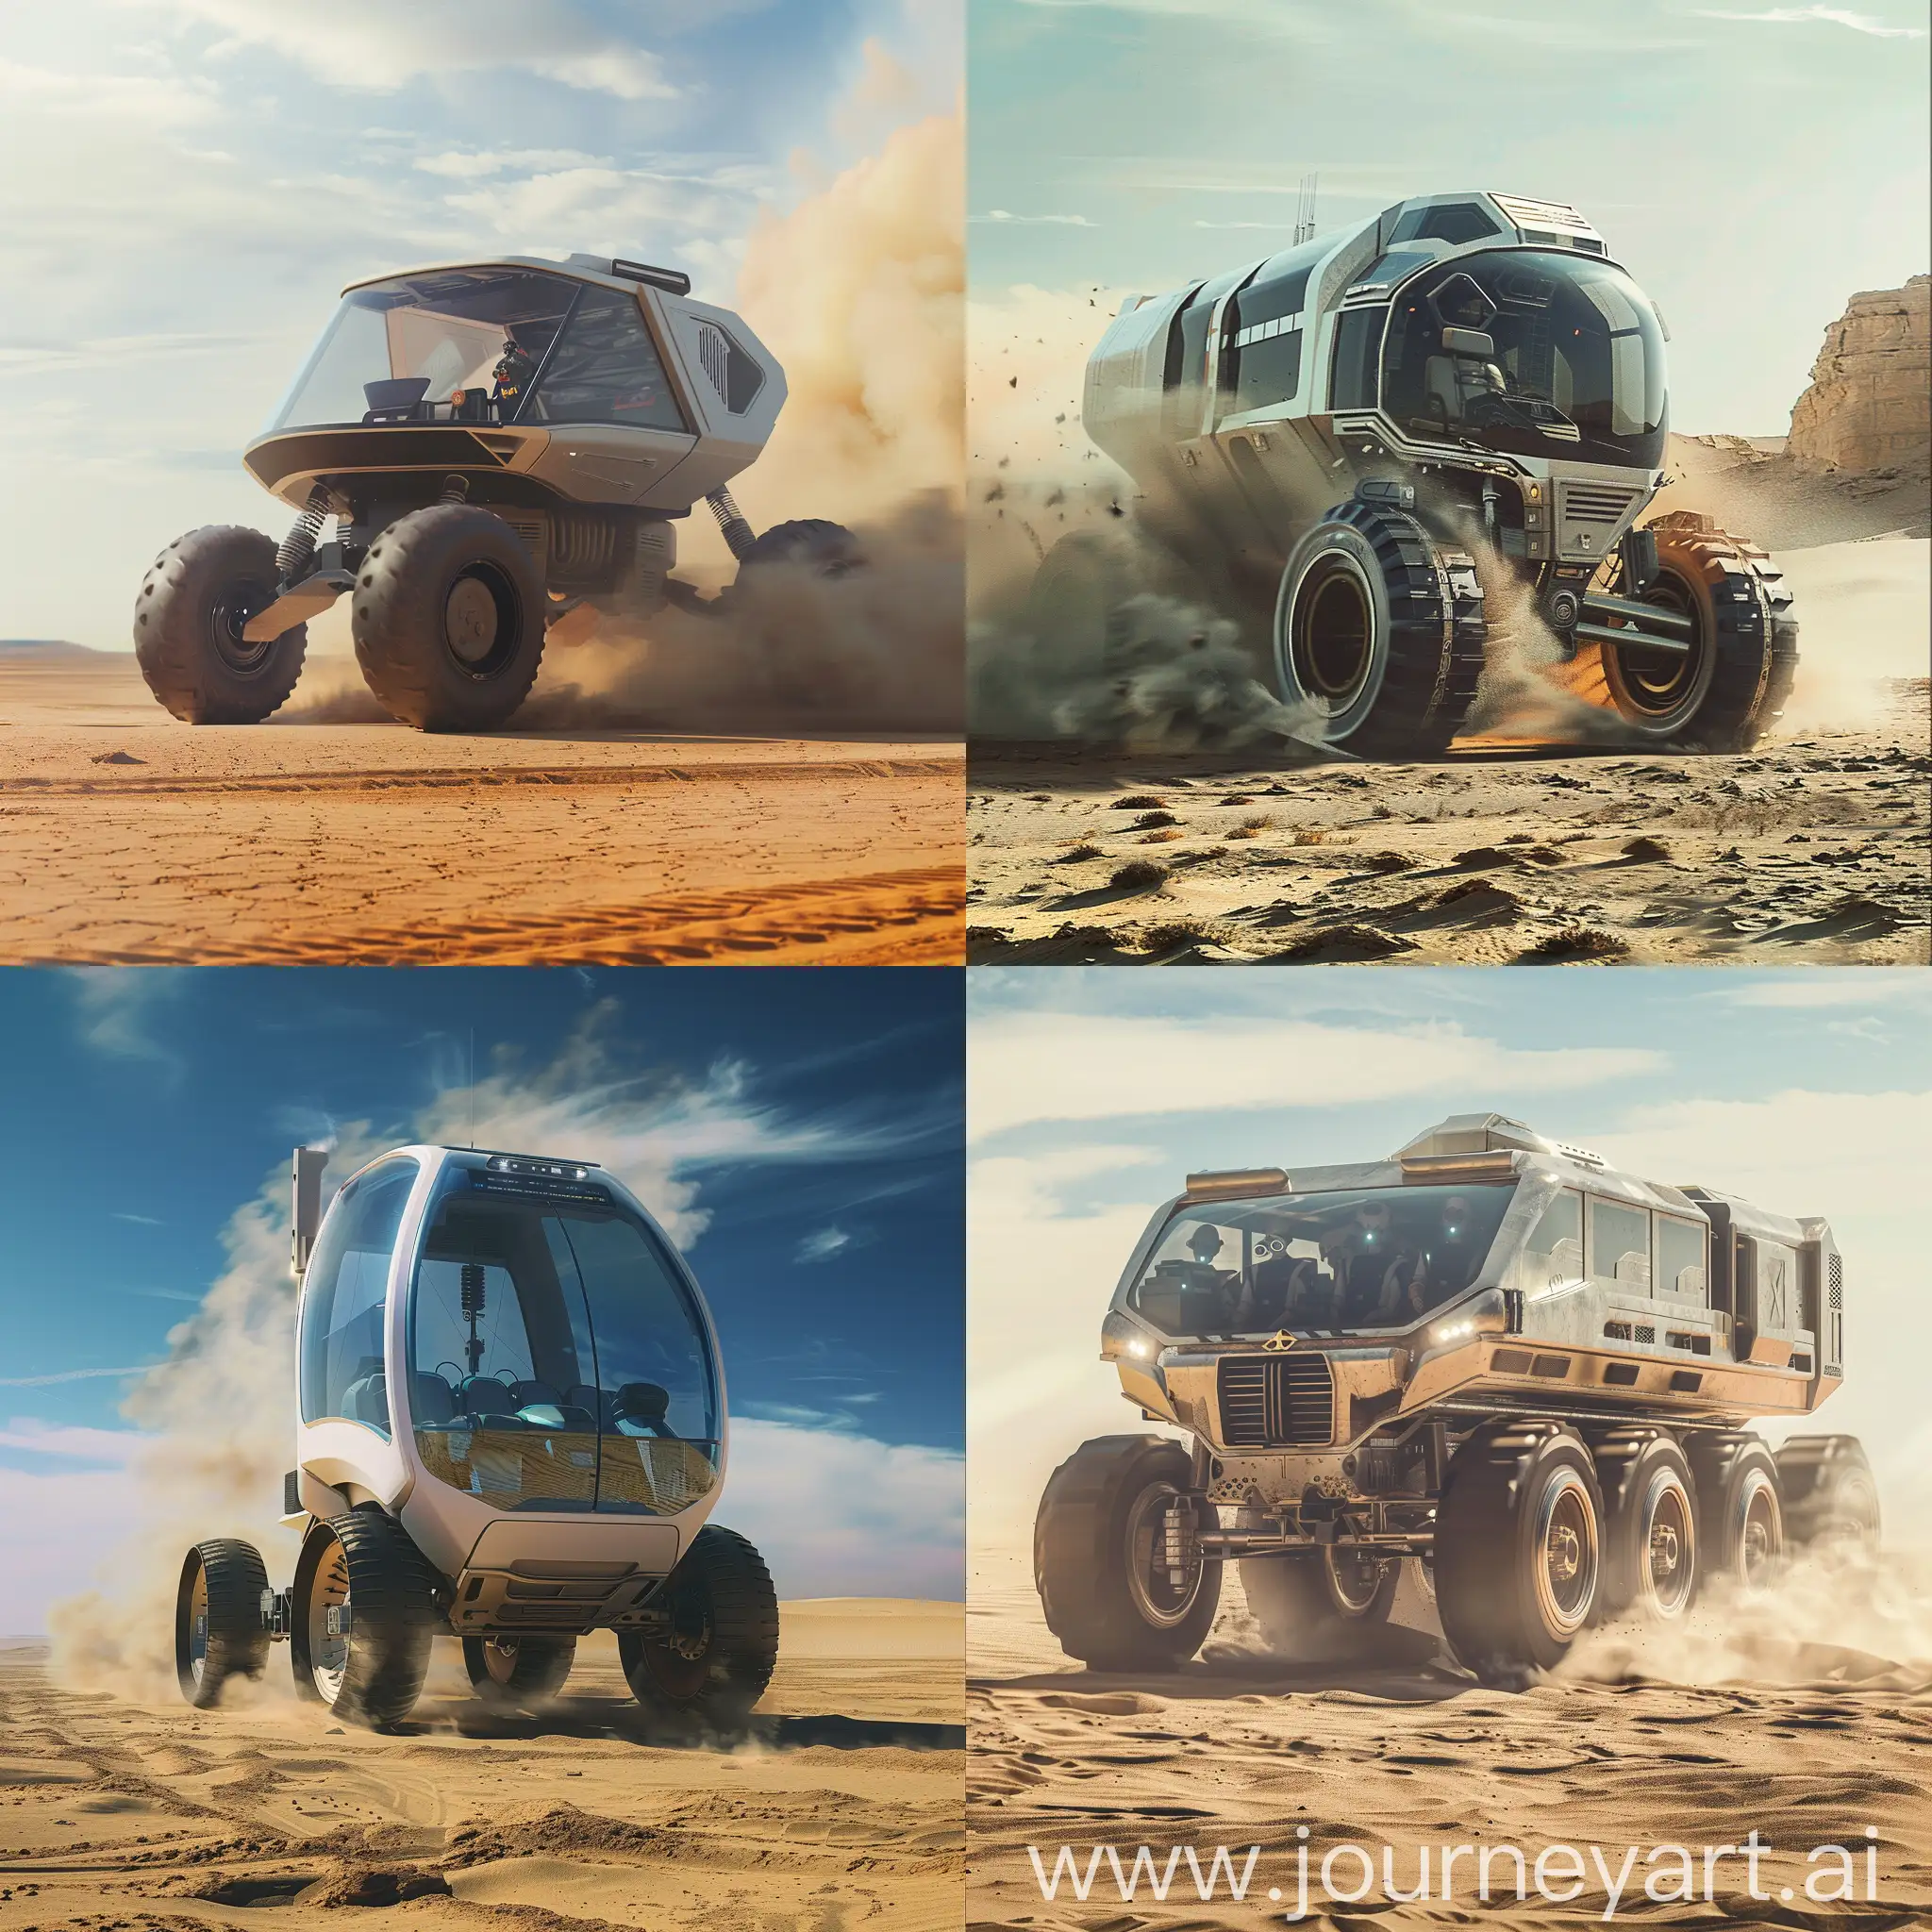 Futuristic-6Wheeled-Vehicle-Transporting-Personnel-on-a-Deserted-Planet